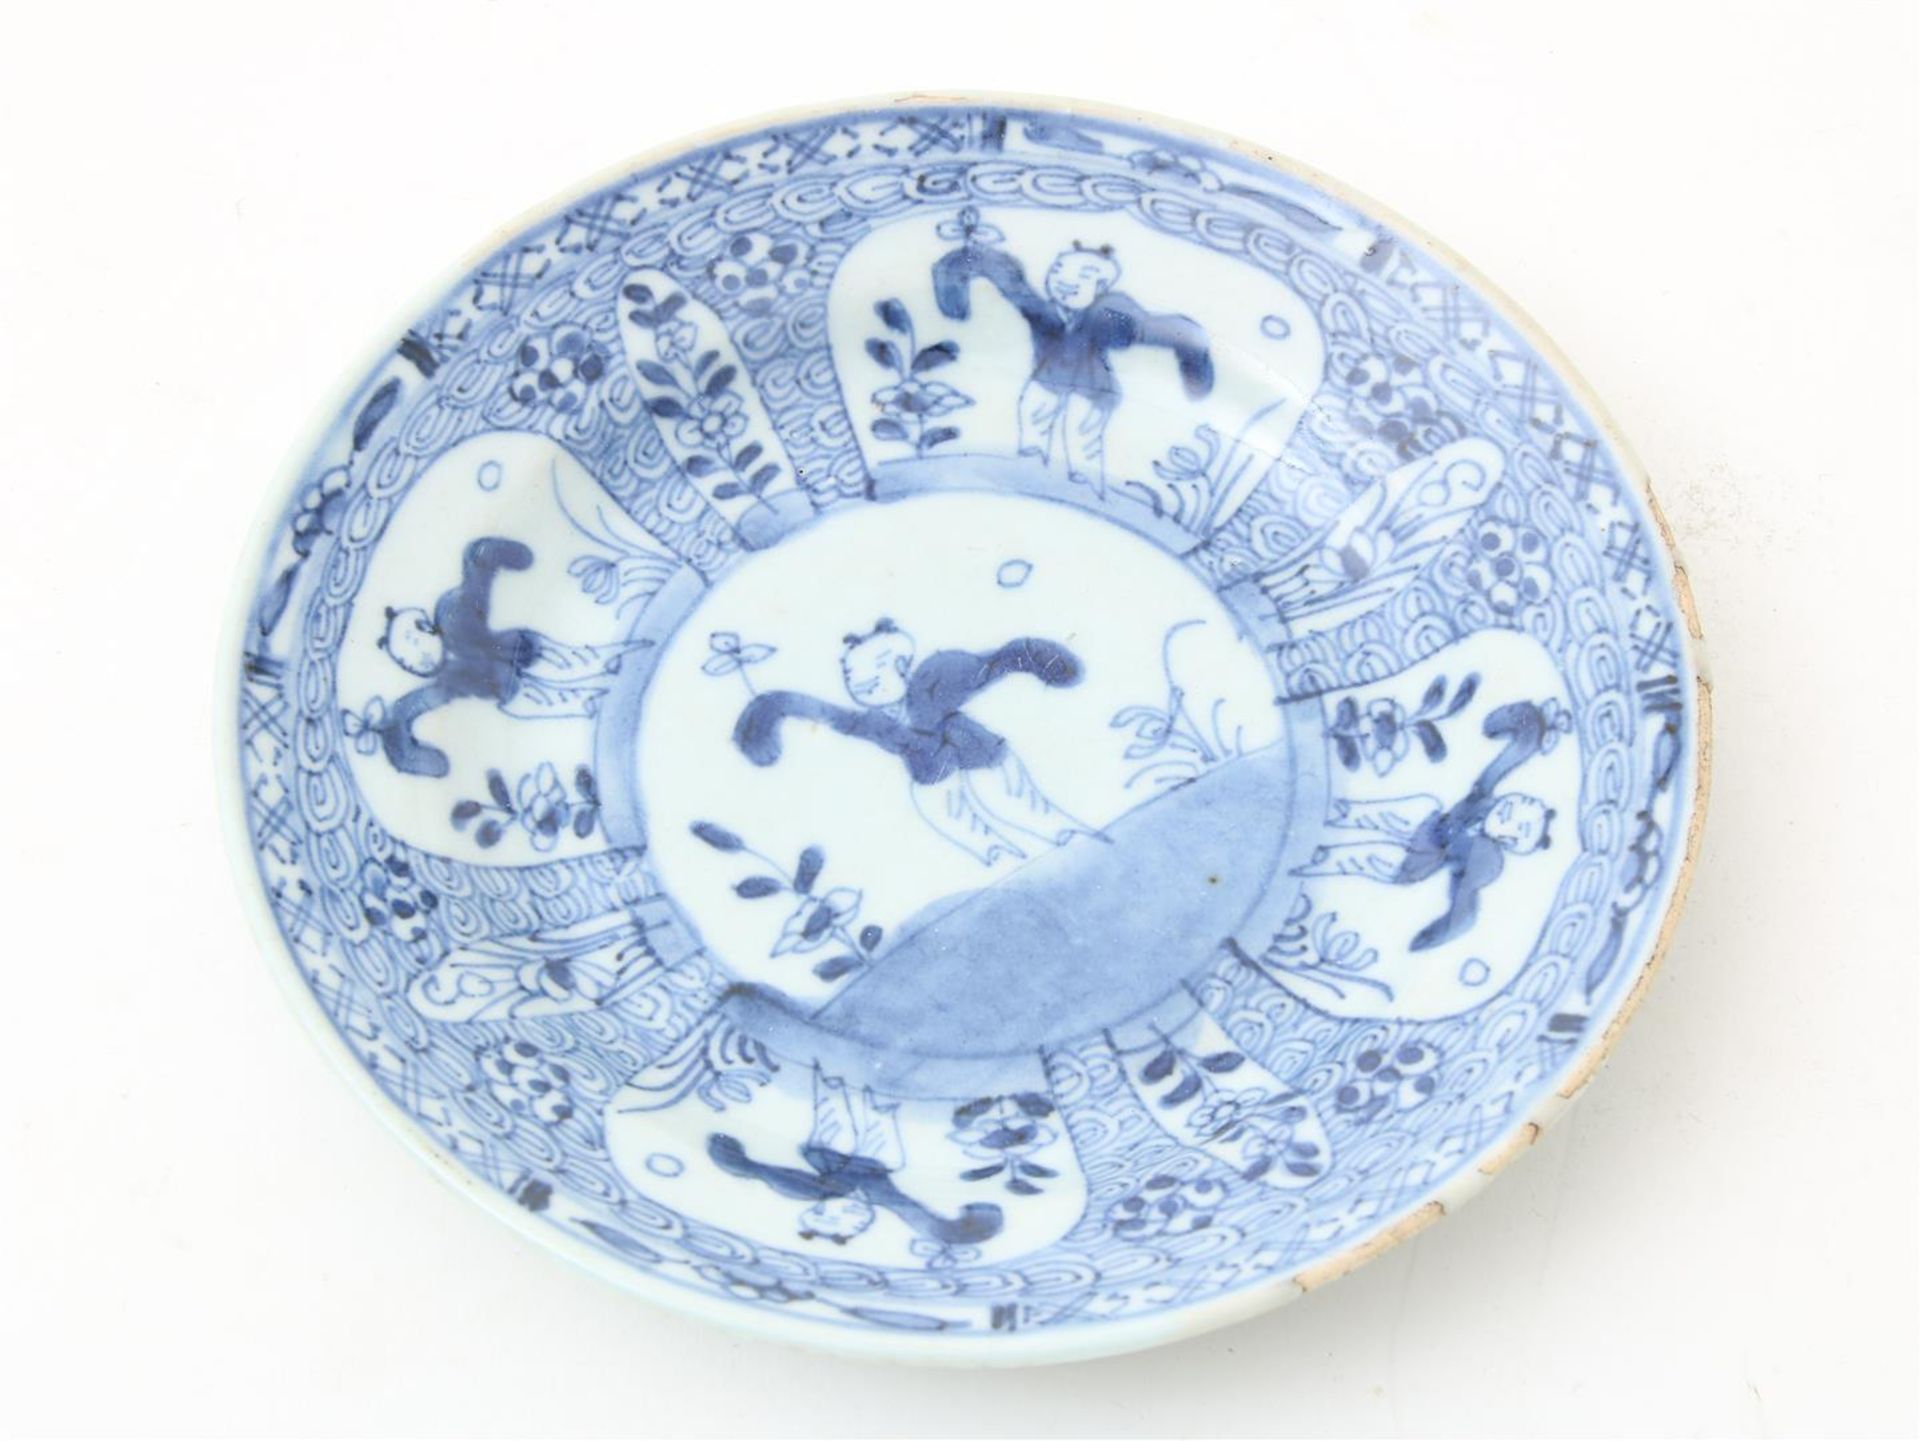 Series of 5 porcelain plates, China 19th century - Image 6 of 9